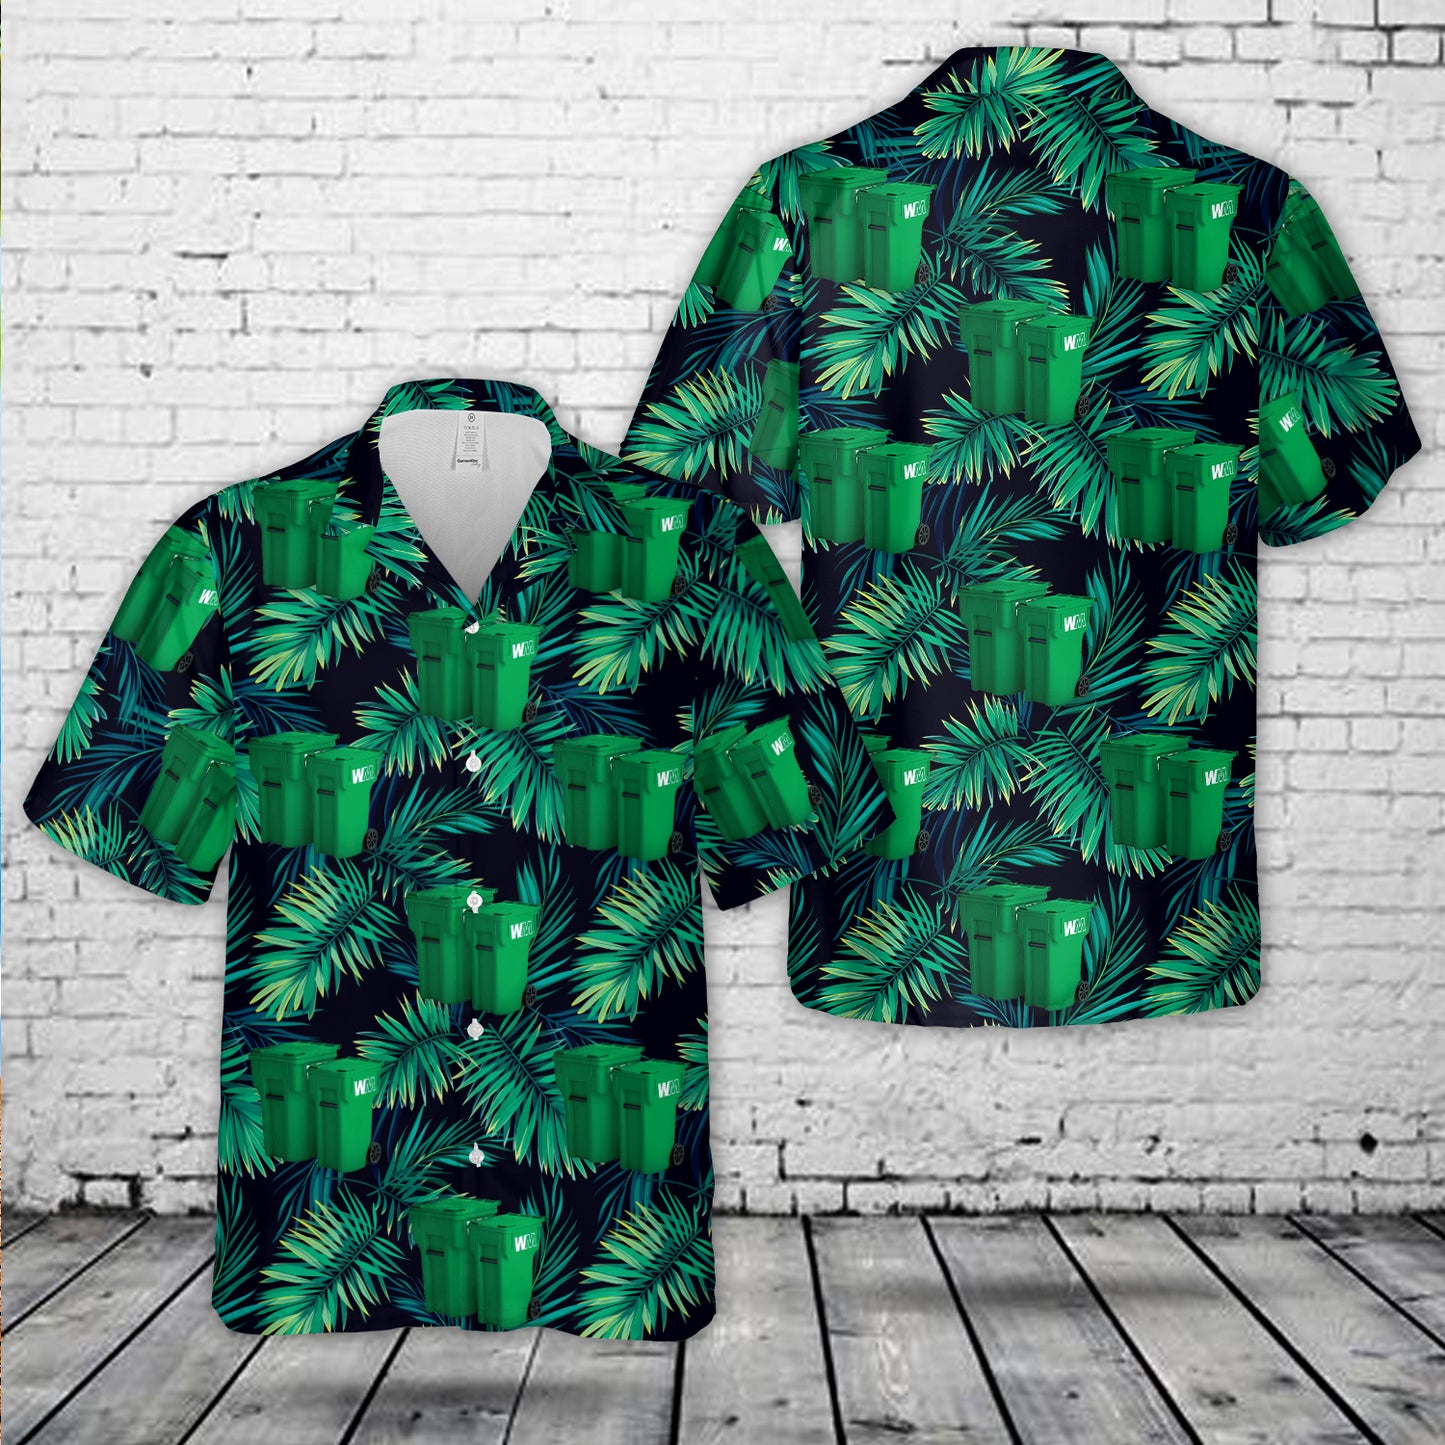 Waste Management 64-Gallon Residential Container Hawaiian Shirt